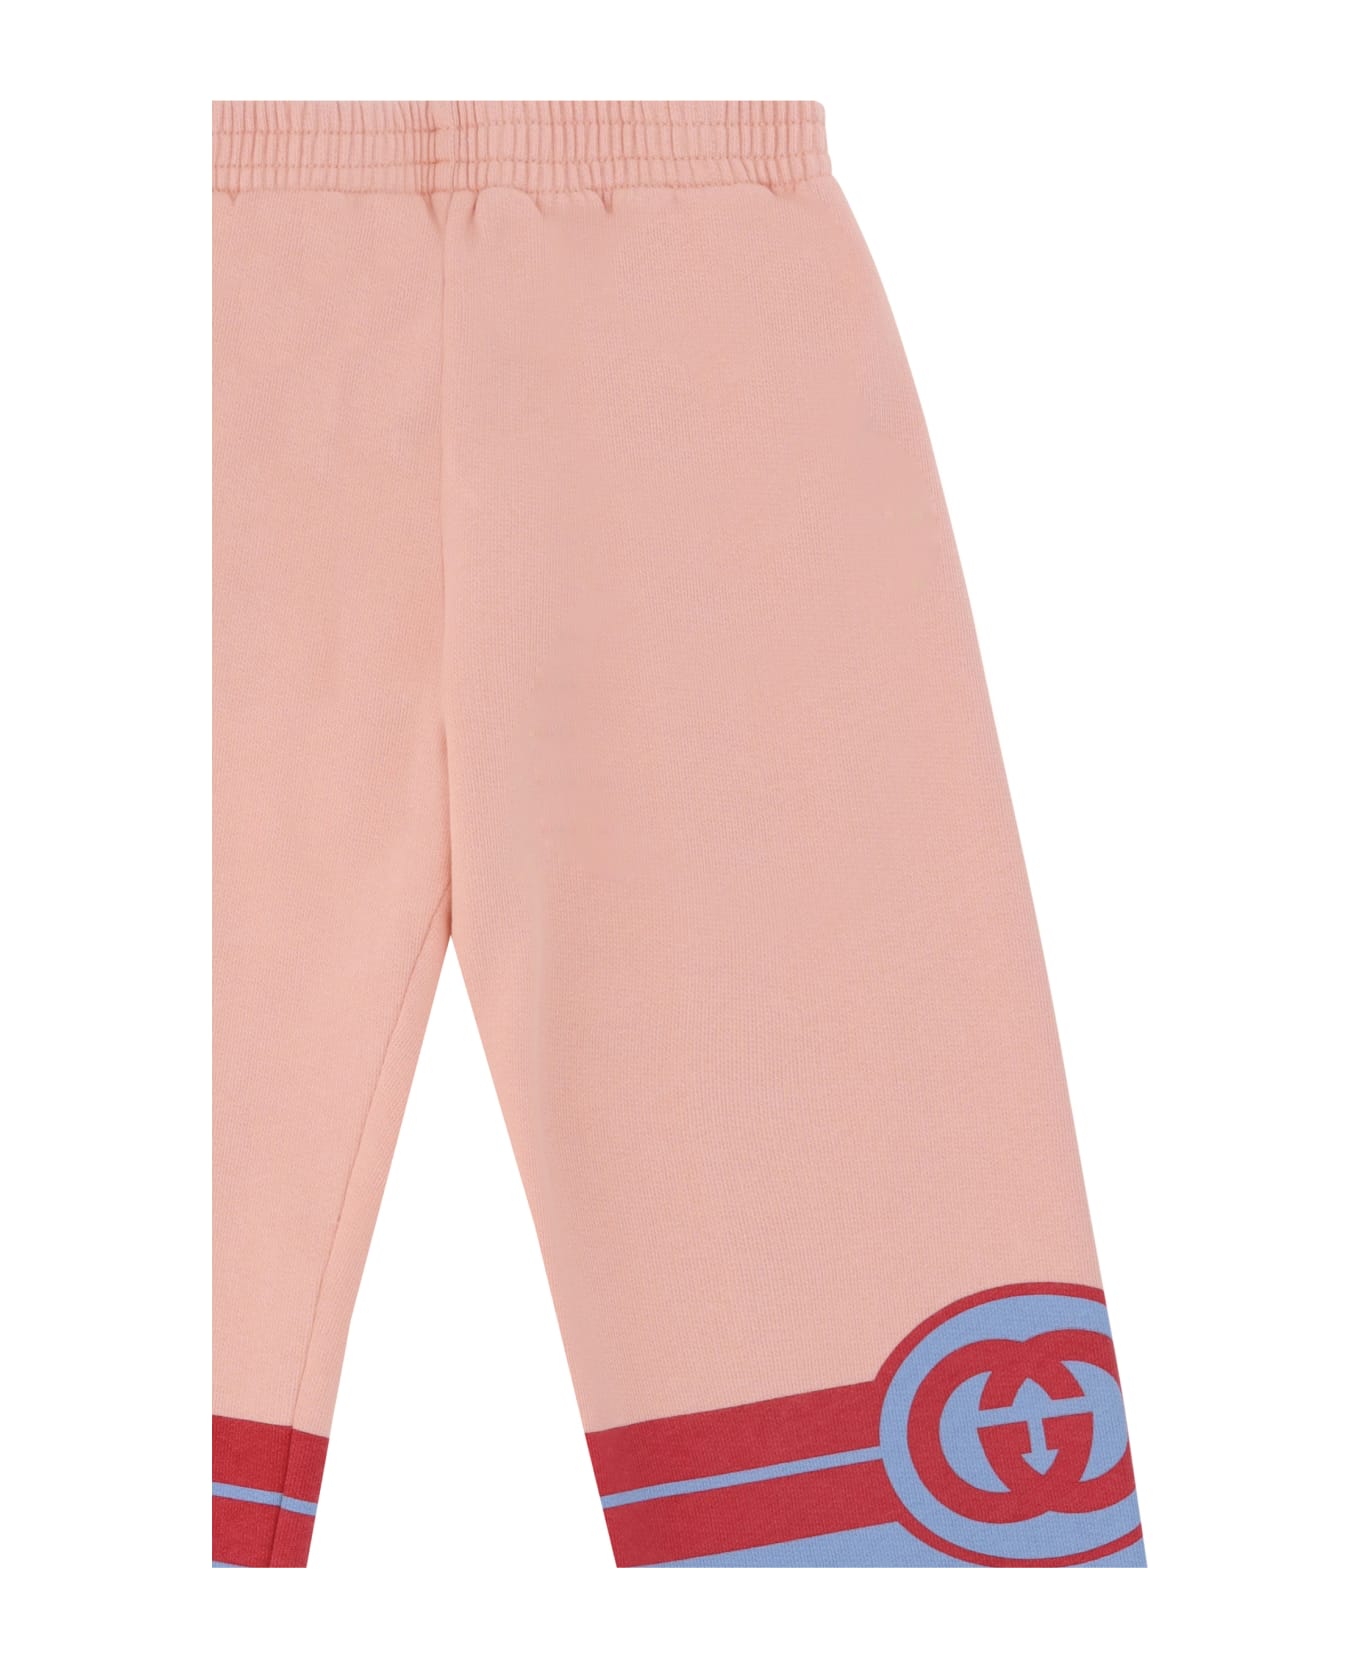 Gucci Pants For Girl - Pink/sky/tulips